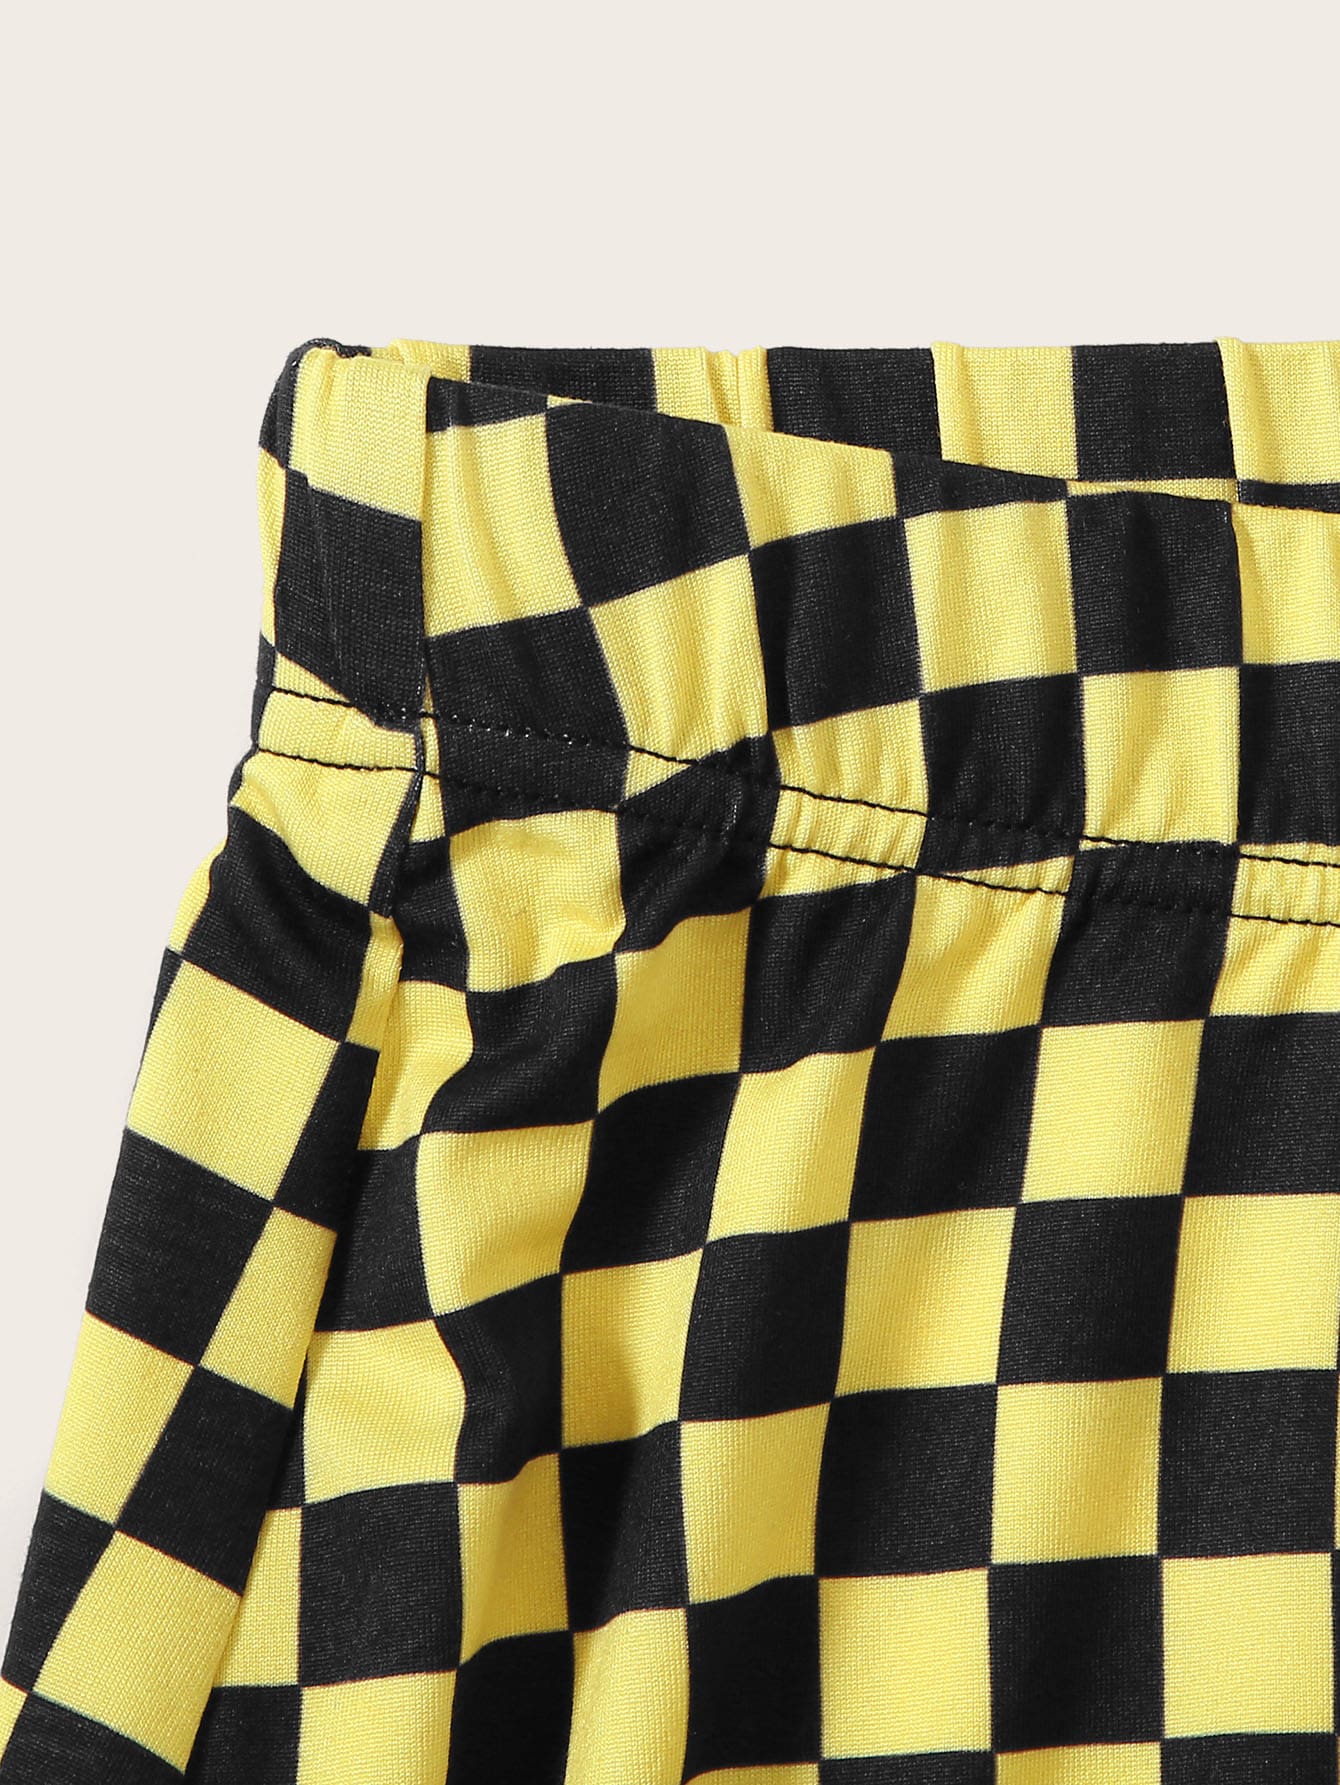 This Or That Checkered Skirt